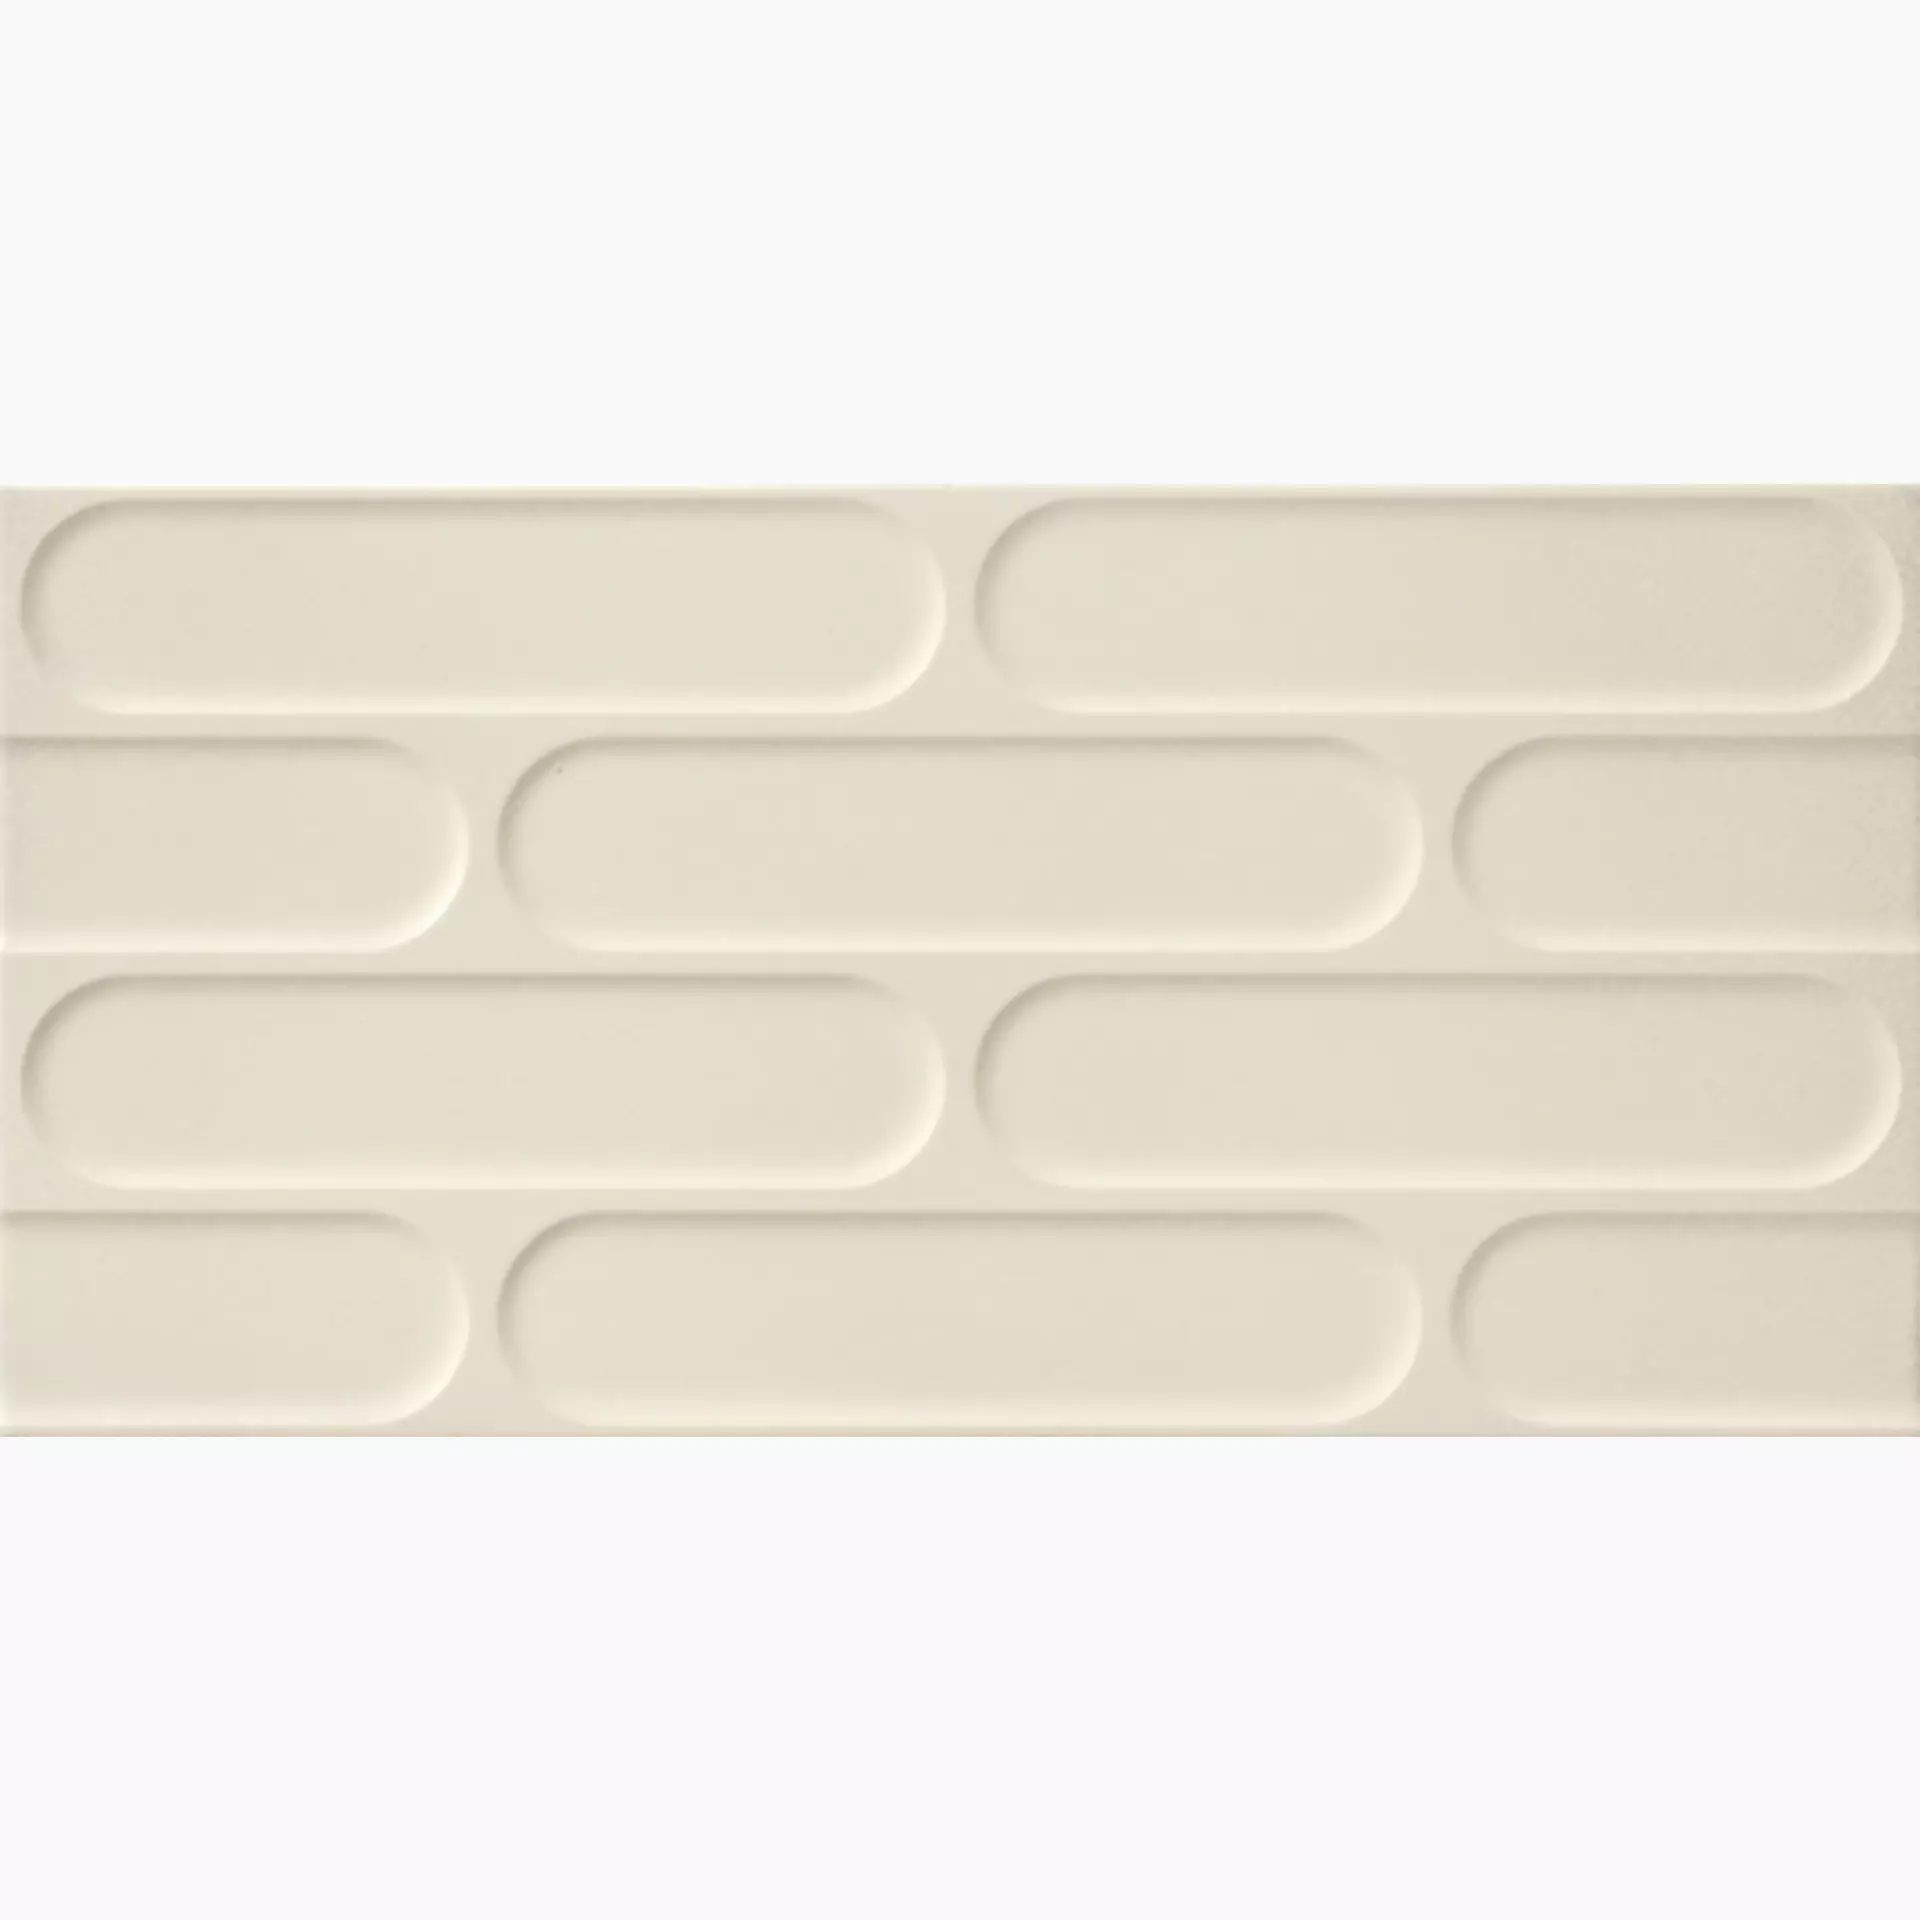 Fioranese Fio.Biscuit Avorio Naturale BIS361R 30,2x60,4cm rectified 10mm